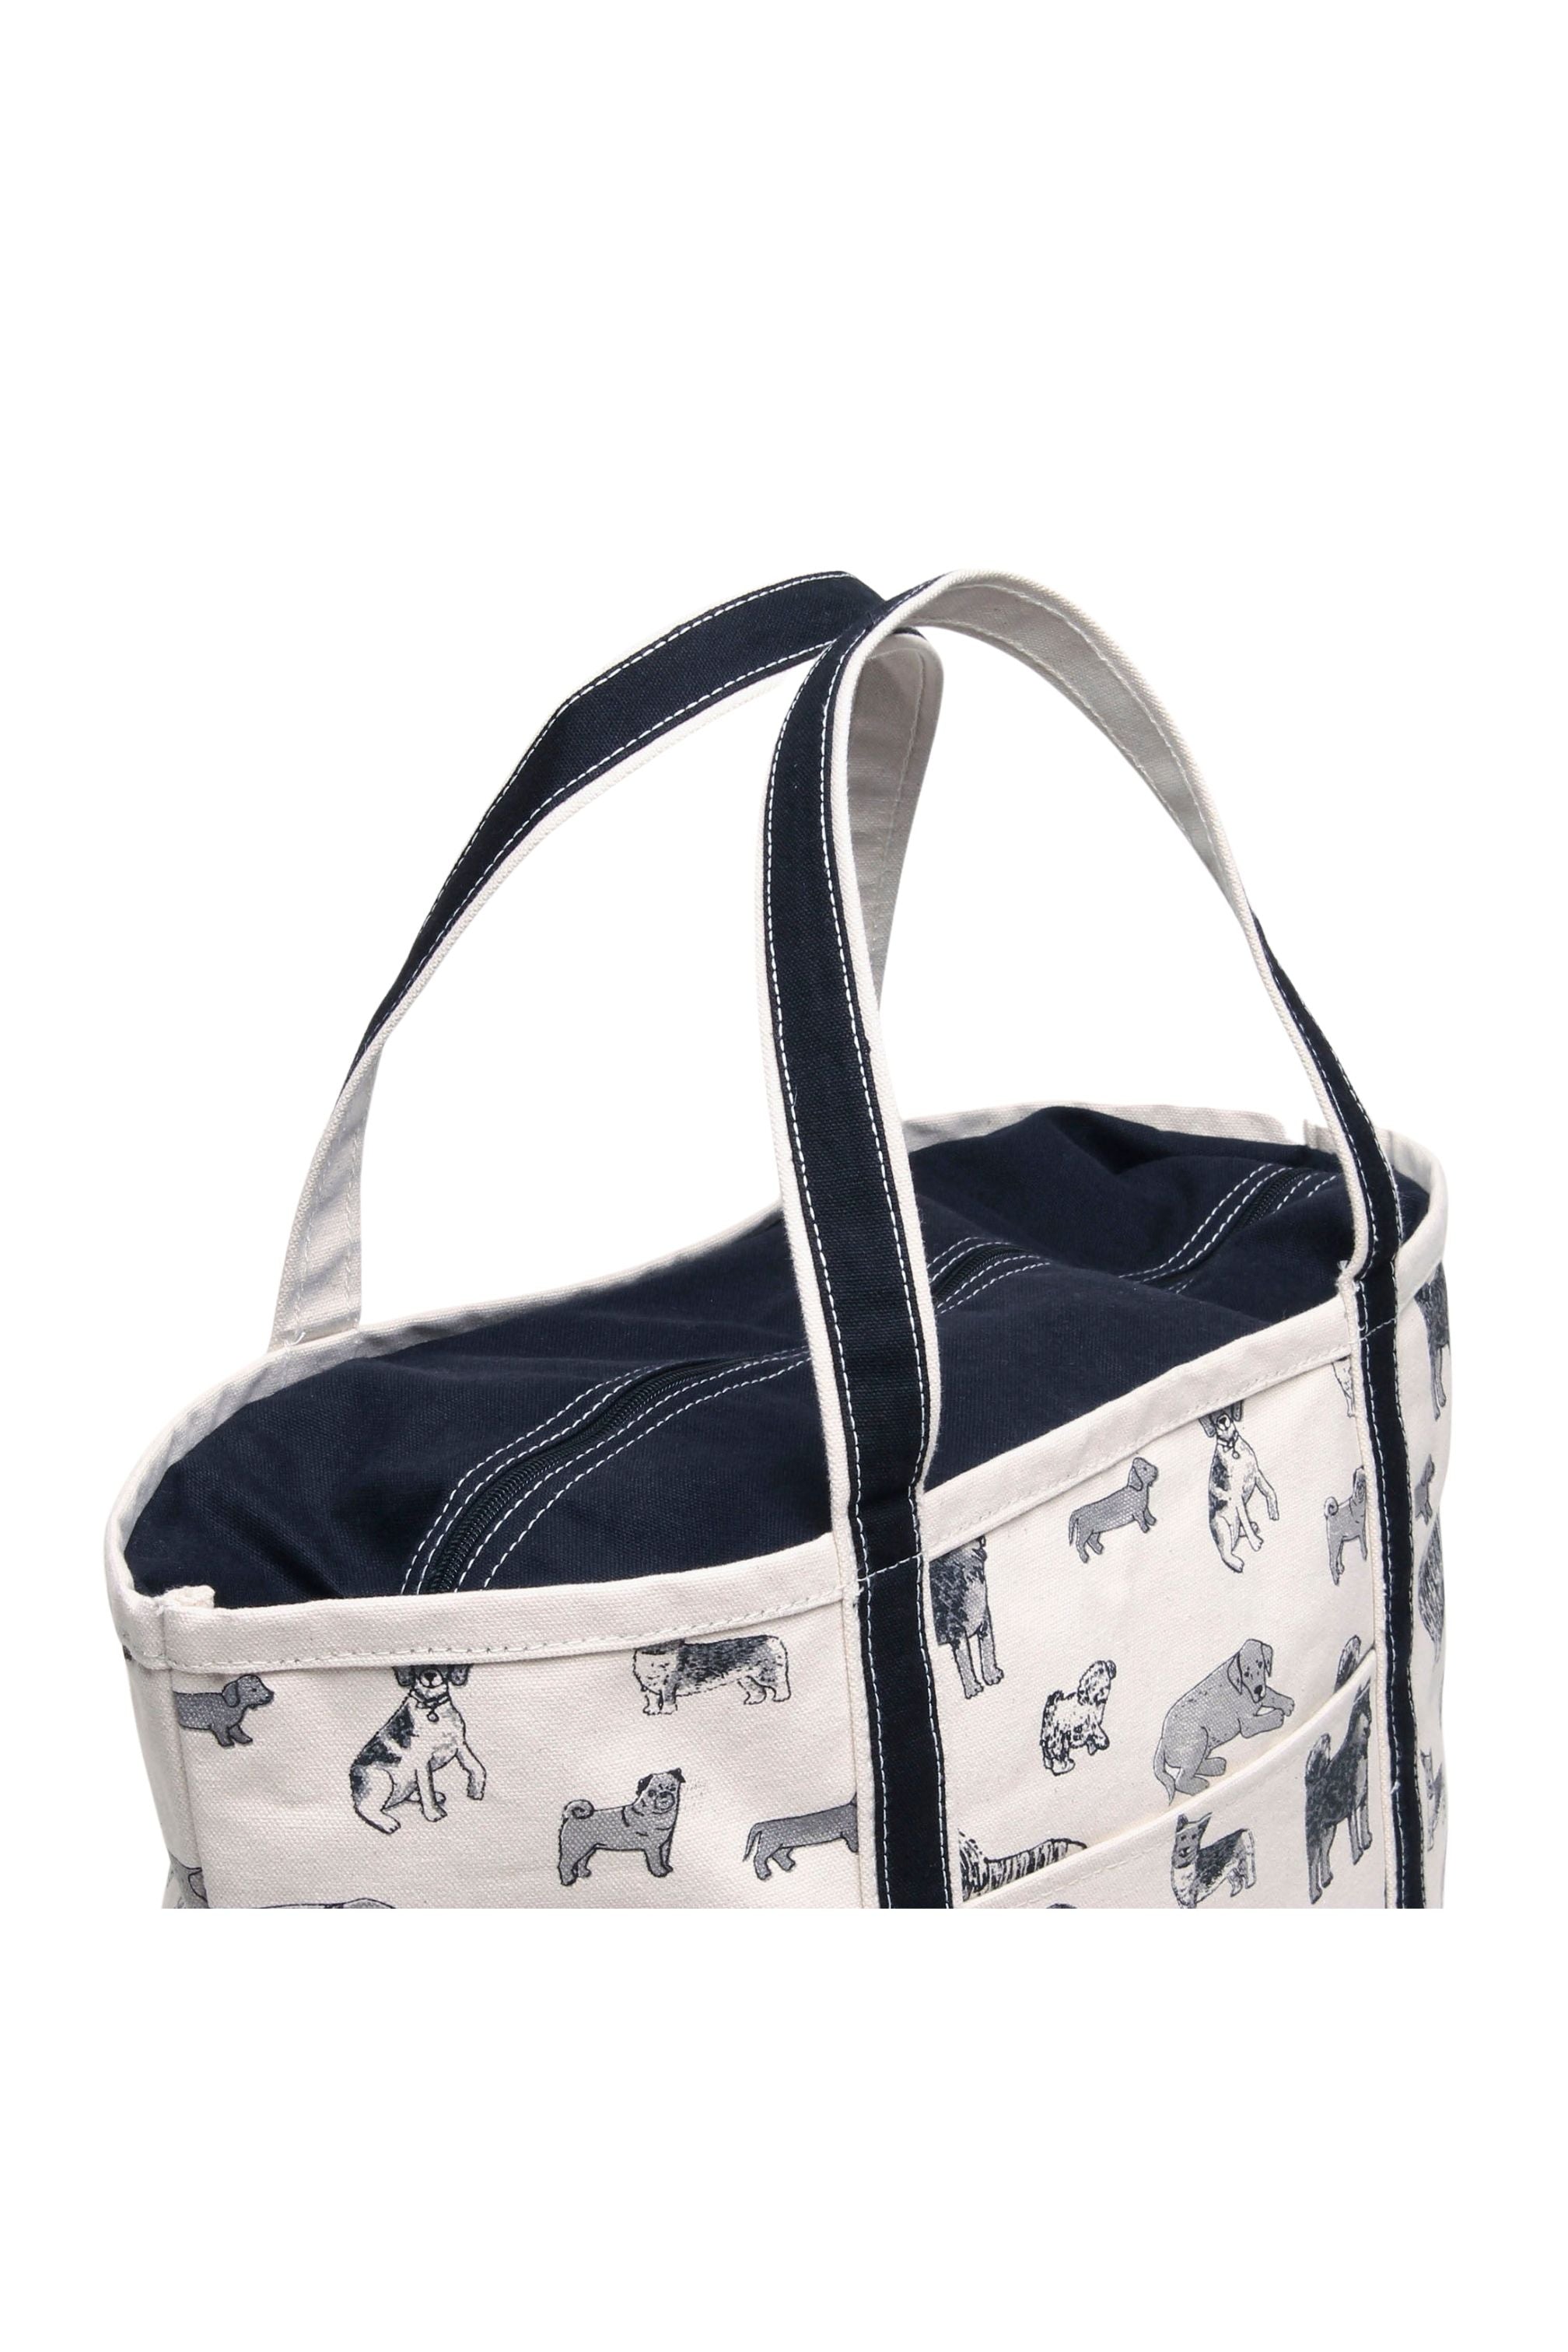 Large Printed Classic Boat Tote